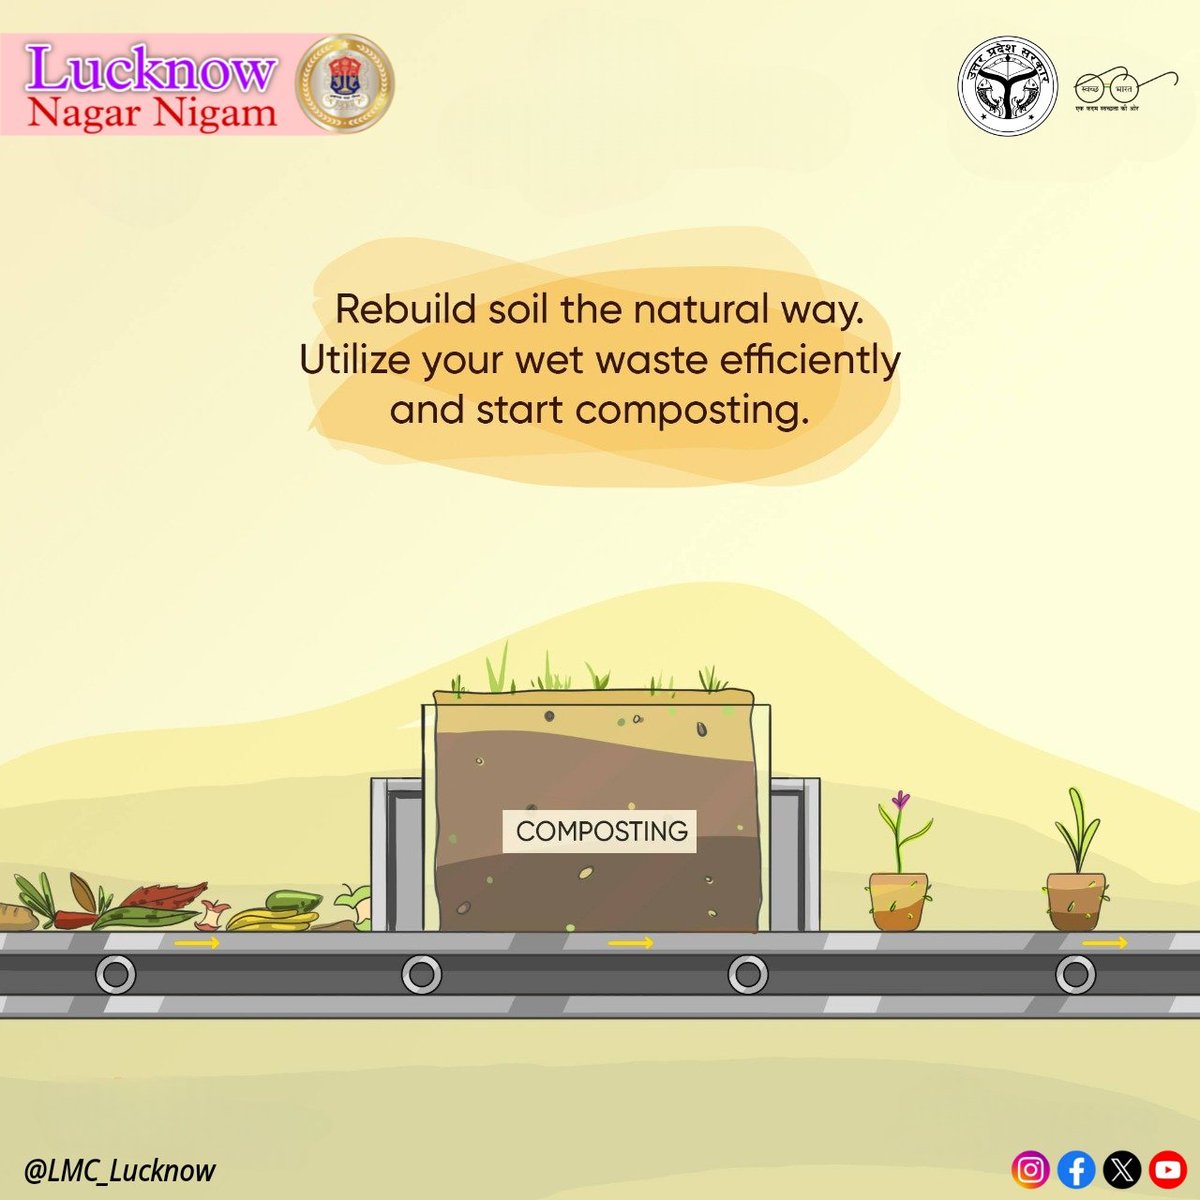 You can use your compost to build healthier soil, prevent soil erosion, conserve water, and improve plant growth in your garden and yard.

Start composting ...♻️

#homecomposting
#recycle
@SBM_UP 
@NagarVikas_UP 
@SwachhBharatGov 
@CMOfficeUP 
@aksharmaBharat 
@UPGovt